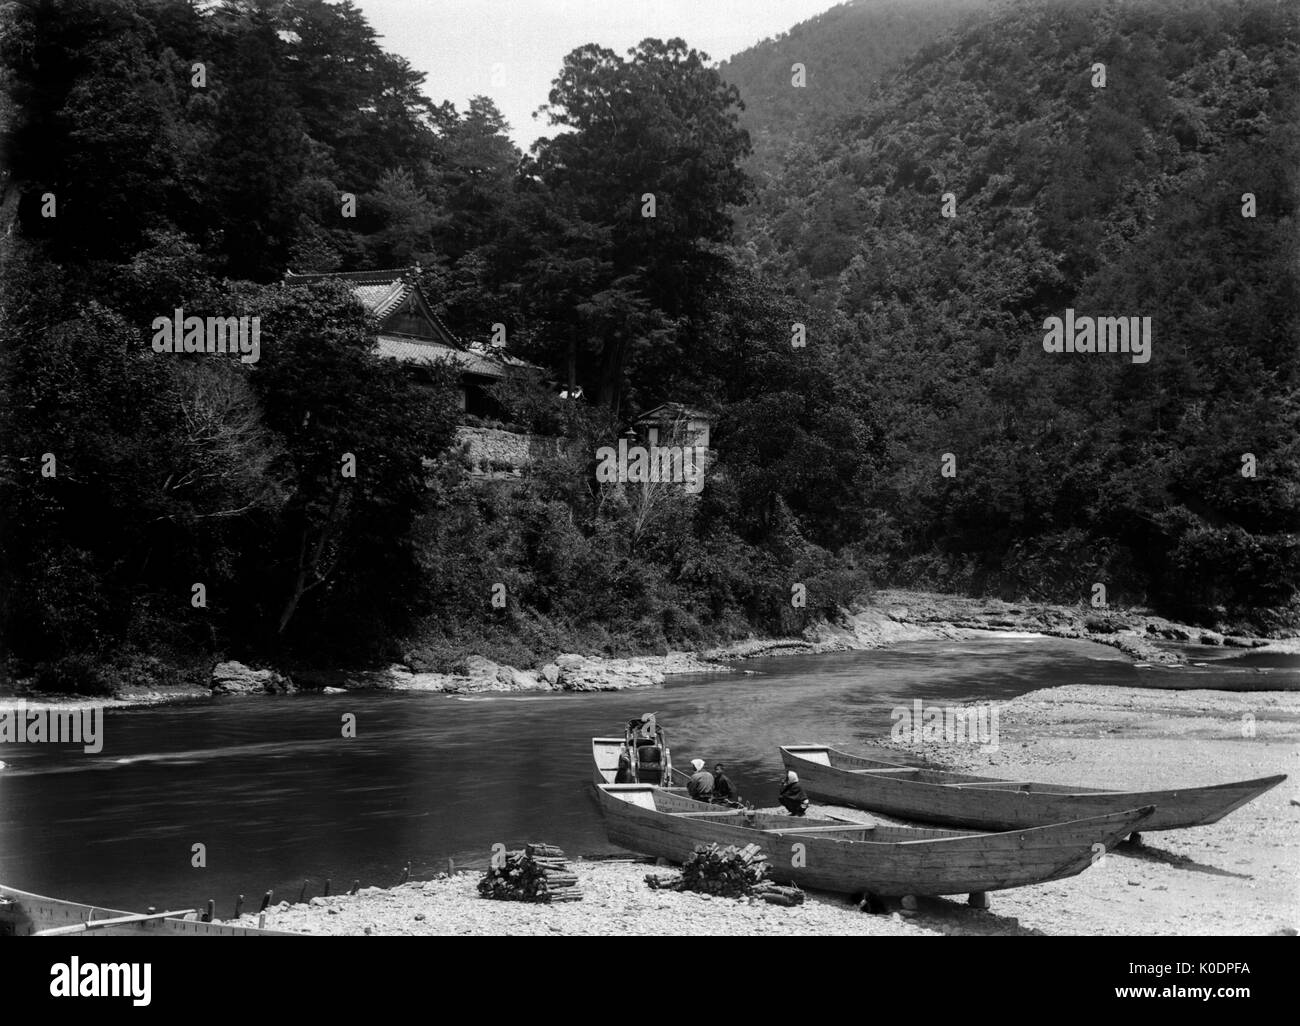 AJAXNETPHOTO. 1900 - 1910 APPROX. JAPAN. - LONGBOATS - A RIVER SCENE AND HILLY LANDSCAPE SCENE WITH WOODEN RIVER BOATS DRAWN UP ON THE RIVER BANK. PHOTOGRAPHER:UNKNOWN © DIGITAL IMAGE COPYRIGHT AJAX VINTAGE PICTURE LIBRARY SOURCE: AJAX VINTAGE PICTURE LIBRARY COLLECTION REF:171308 1013 Stock Photo